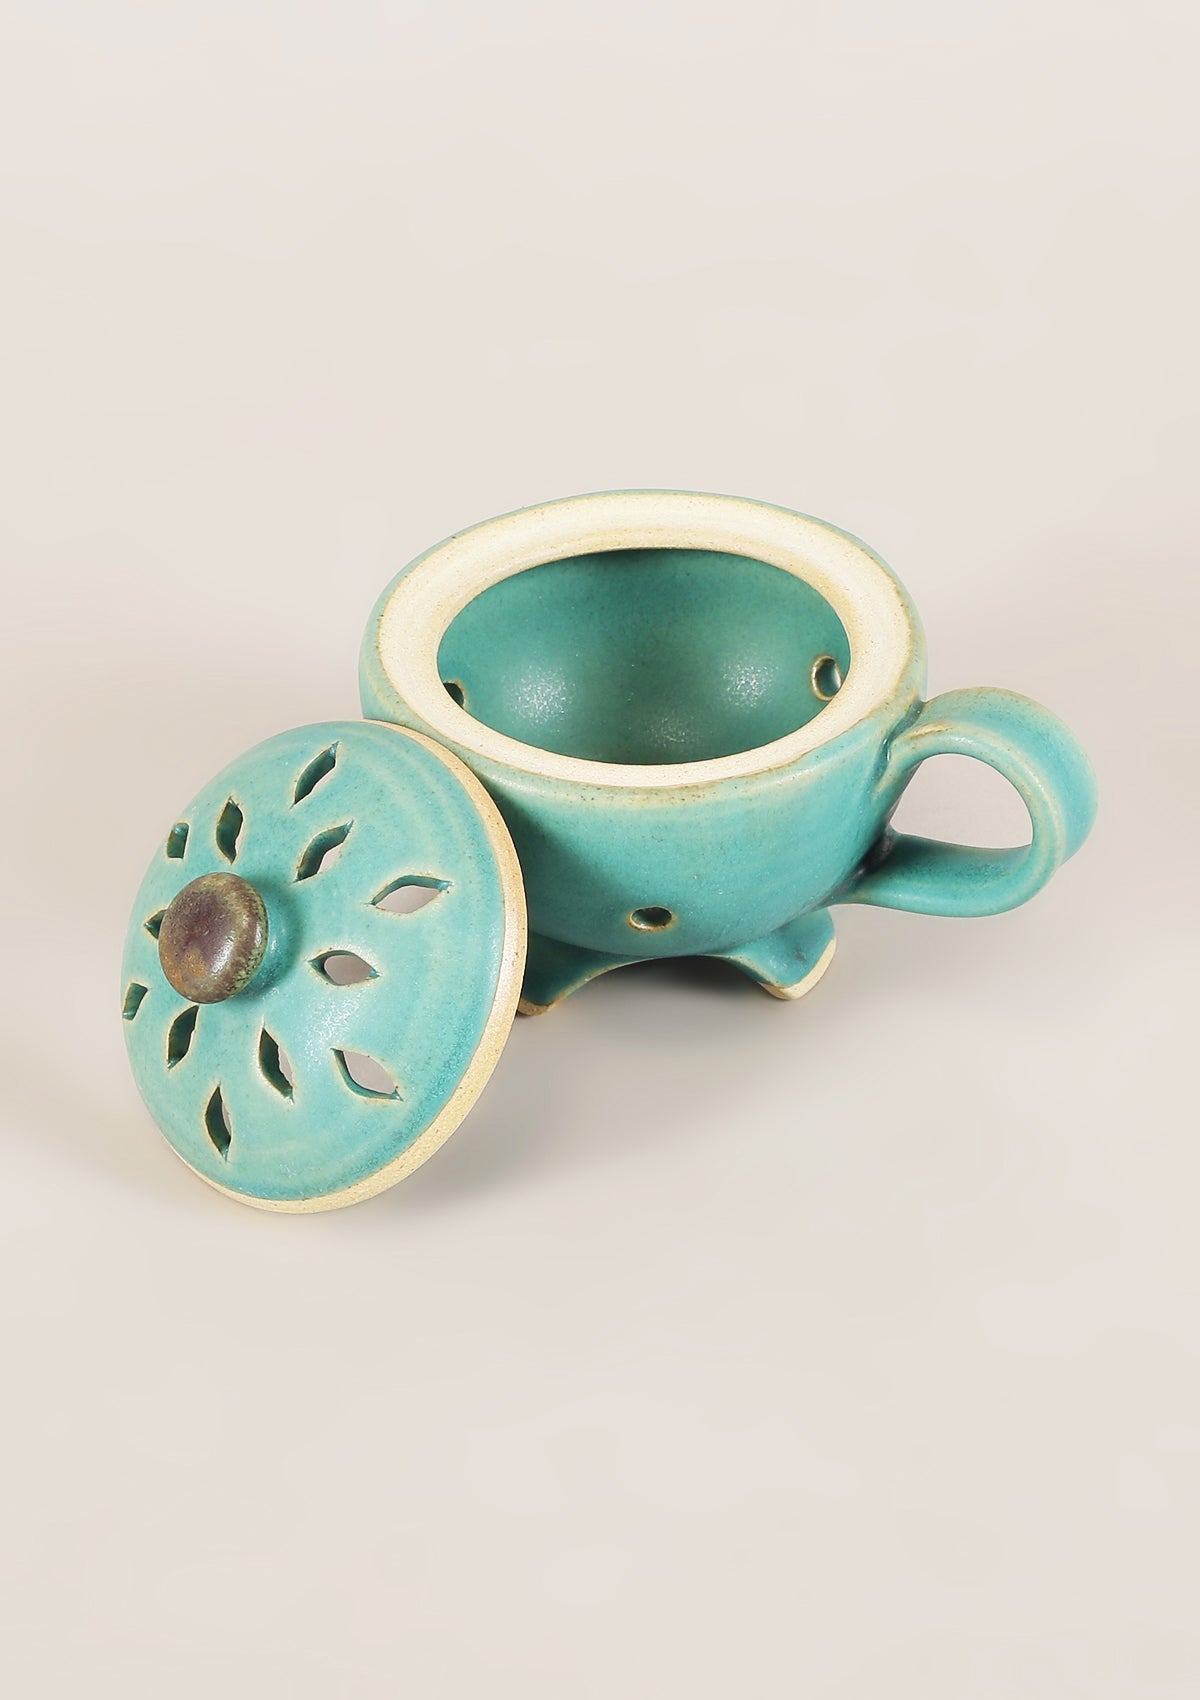 Scented Harmony: IshqMe's Sandal & Musk Dhoop Cones with Artistic Deep Turquoise sea Stand - IshqMe